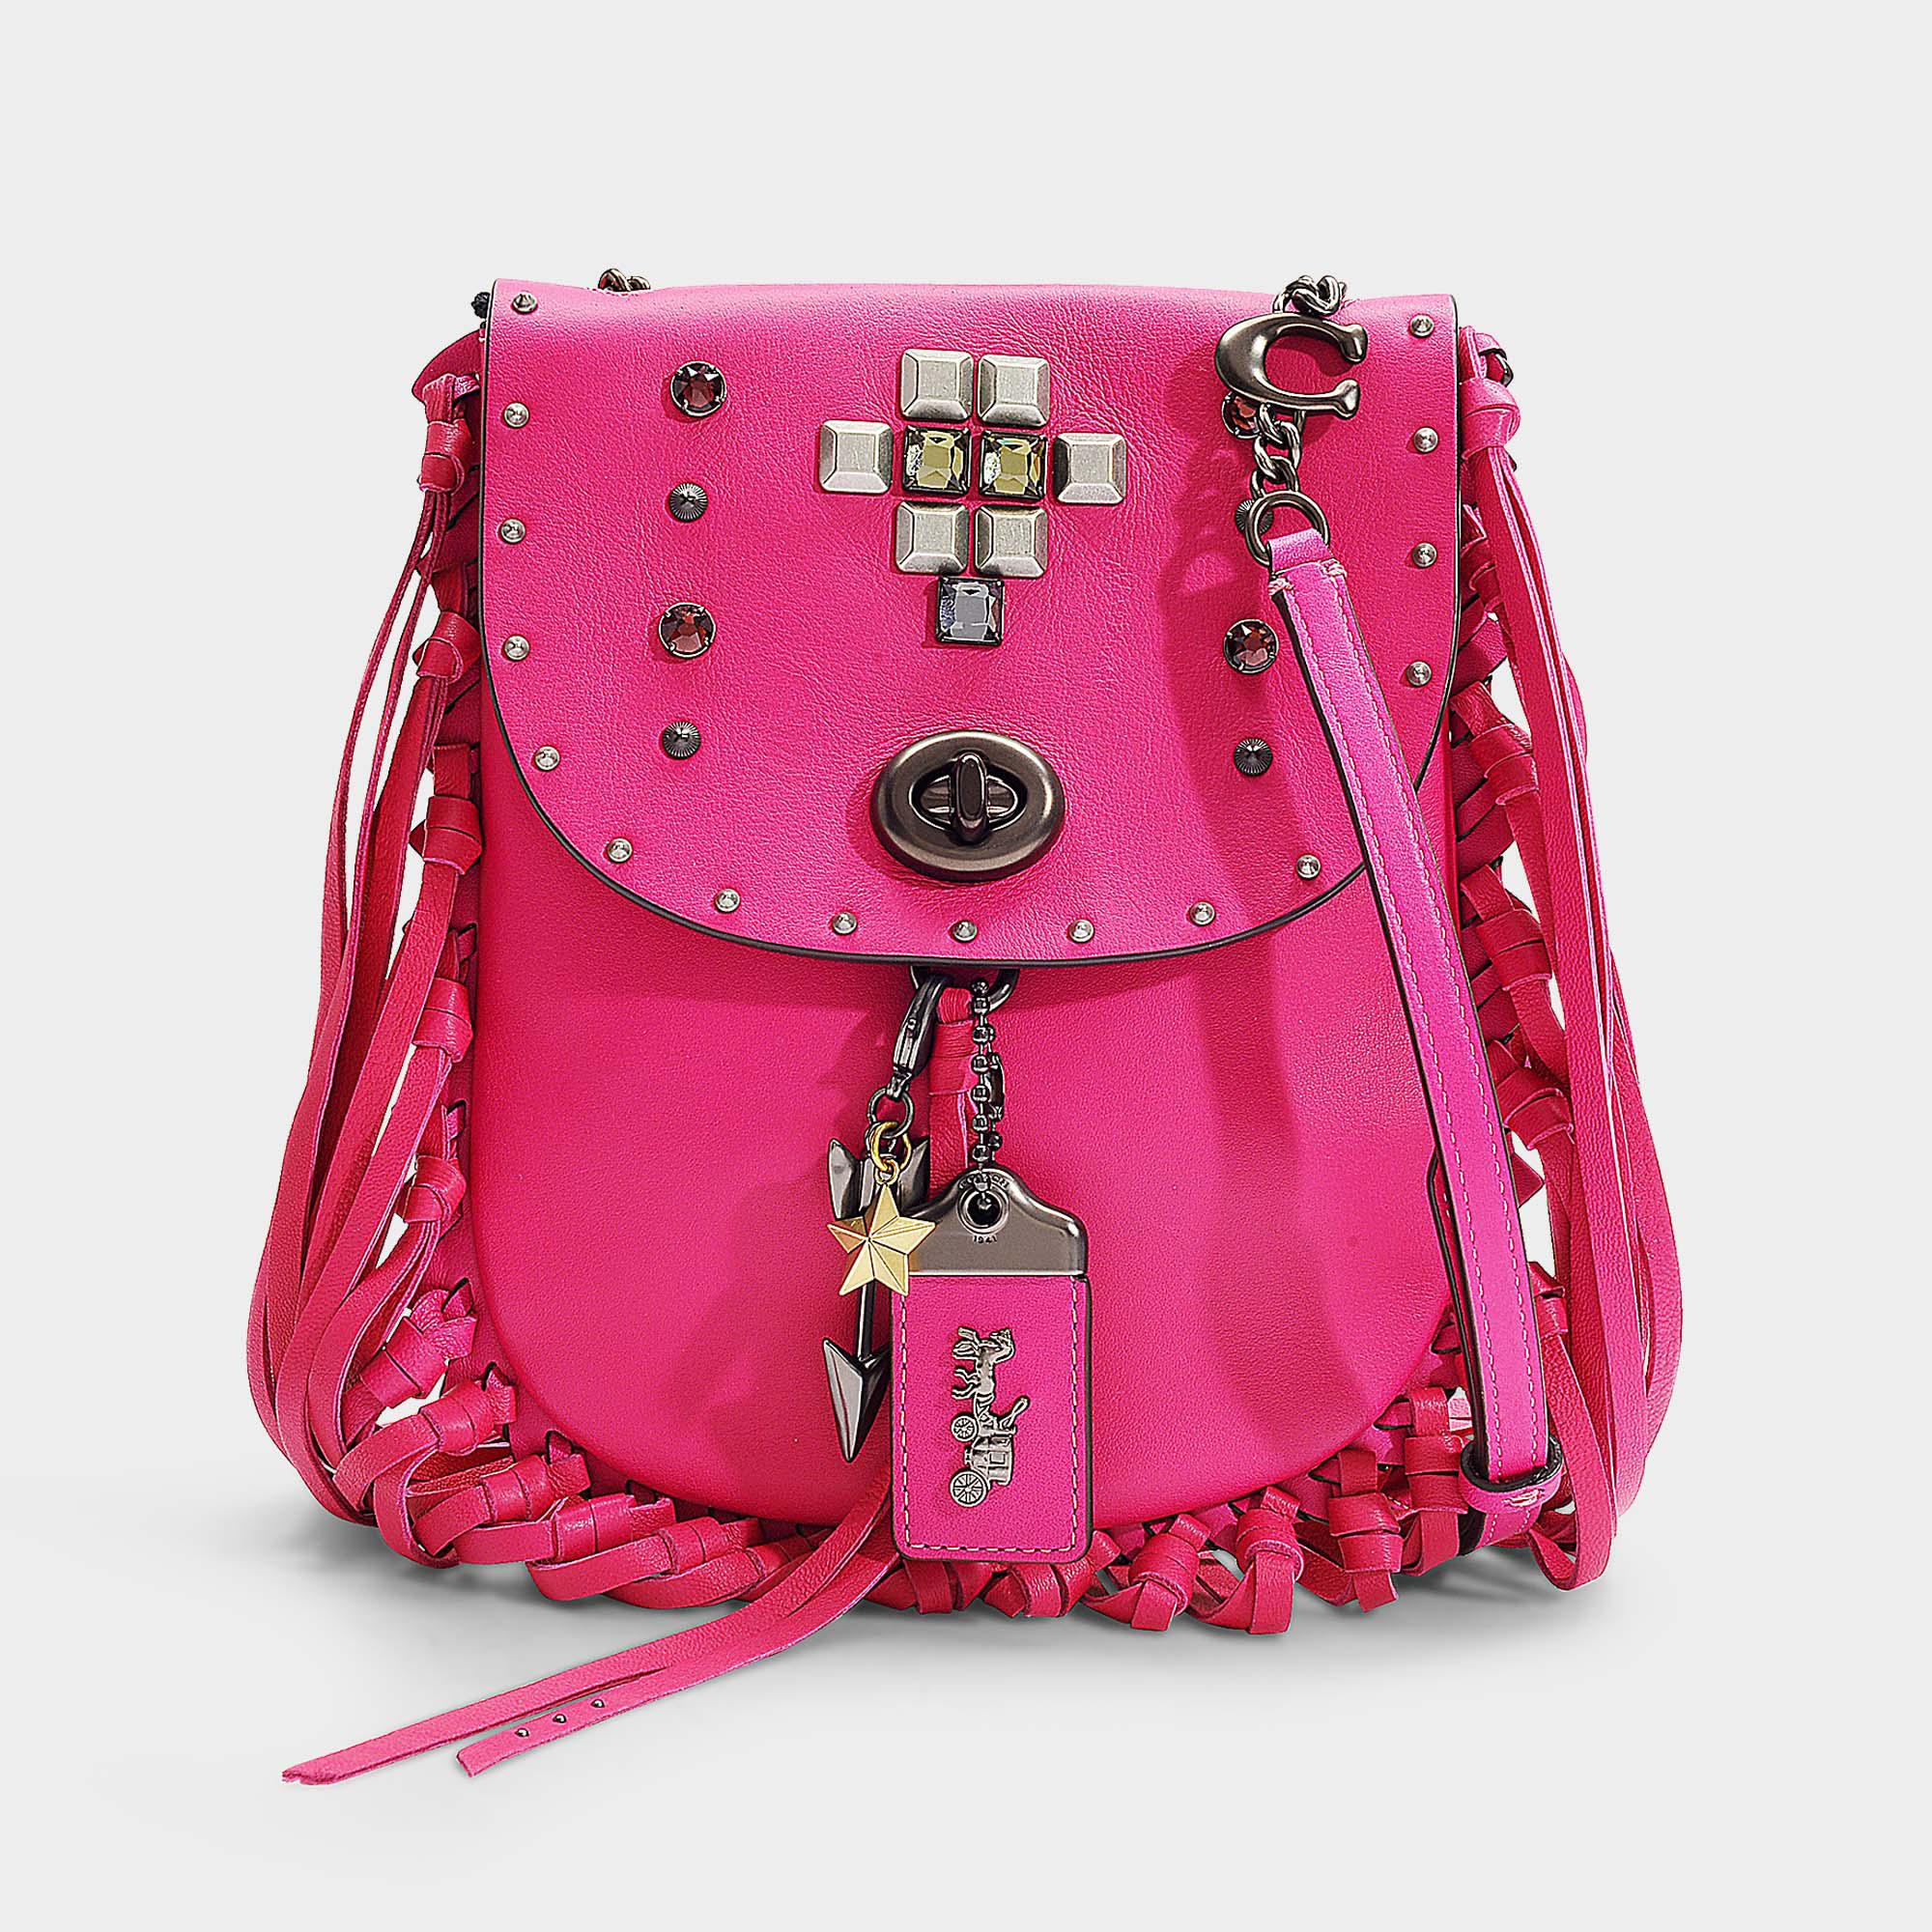 COACH Textured Pyramid Rivets Fringe Saddle Bag In Fuchsia Leather in